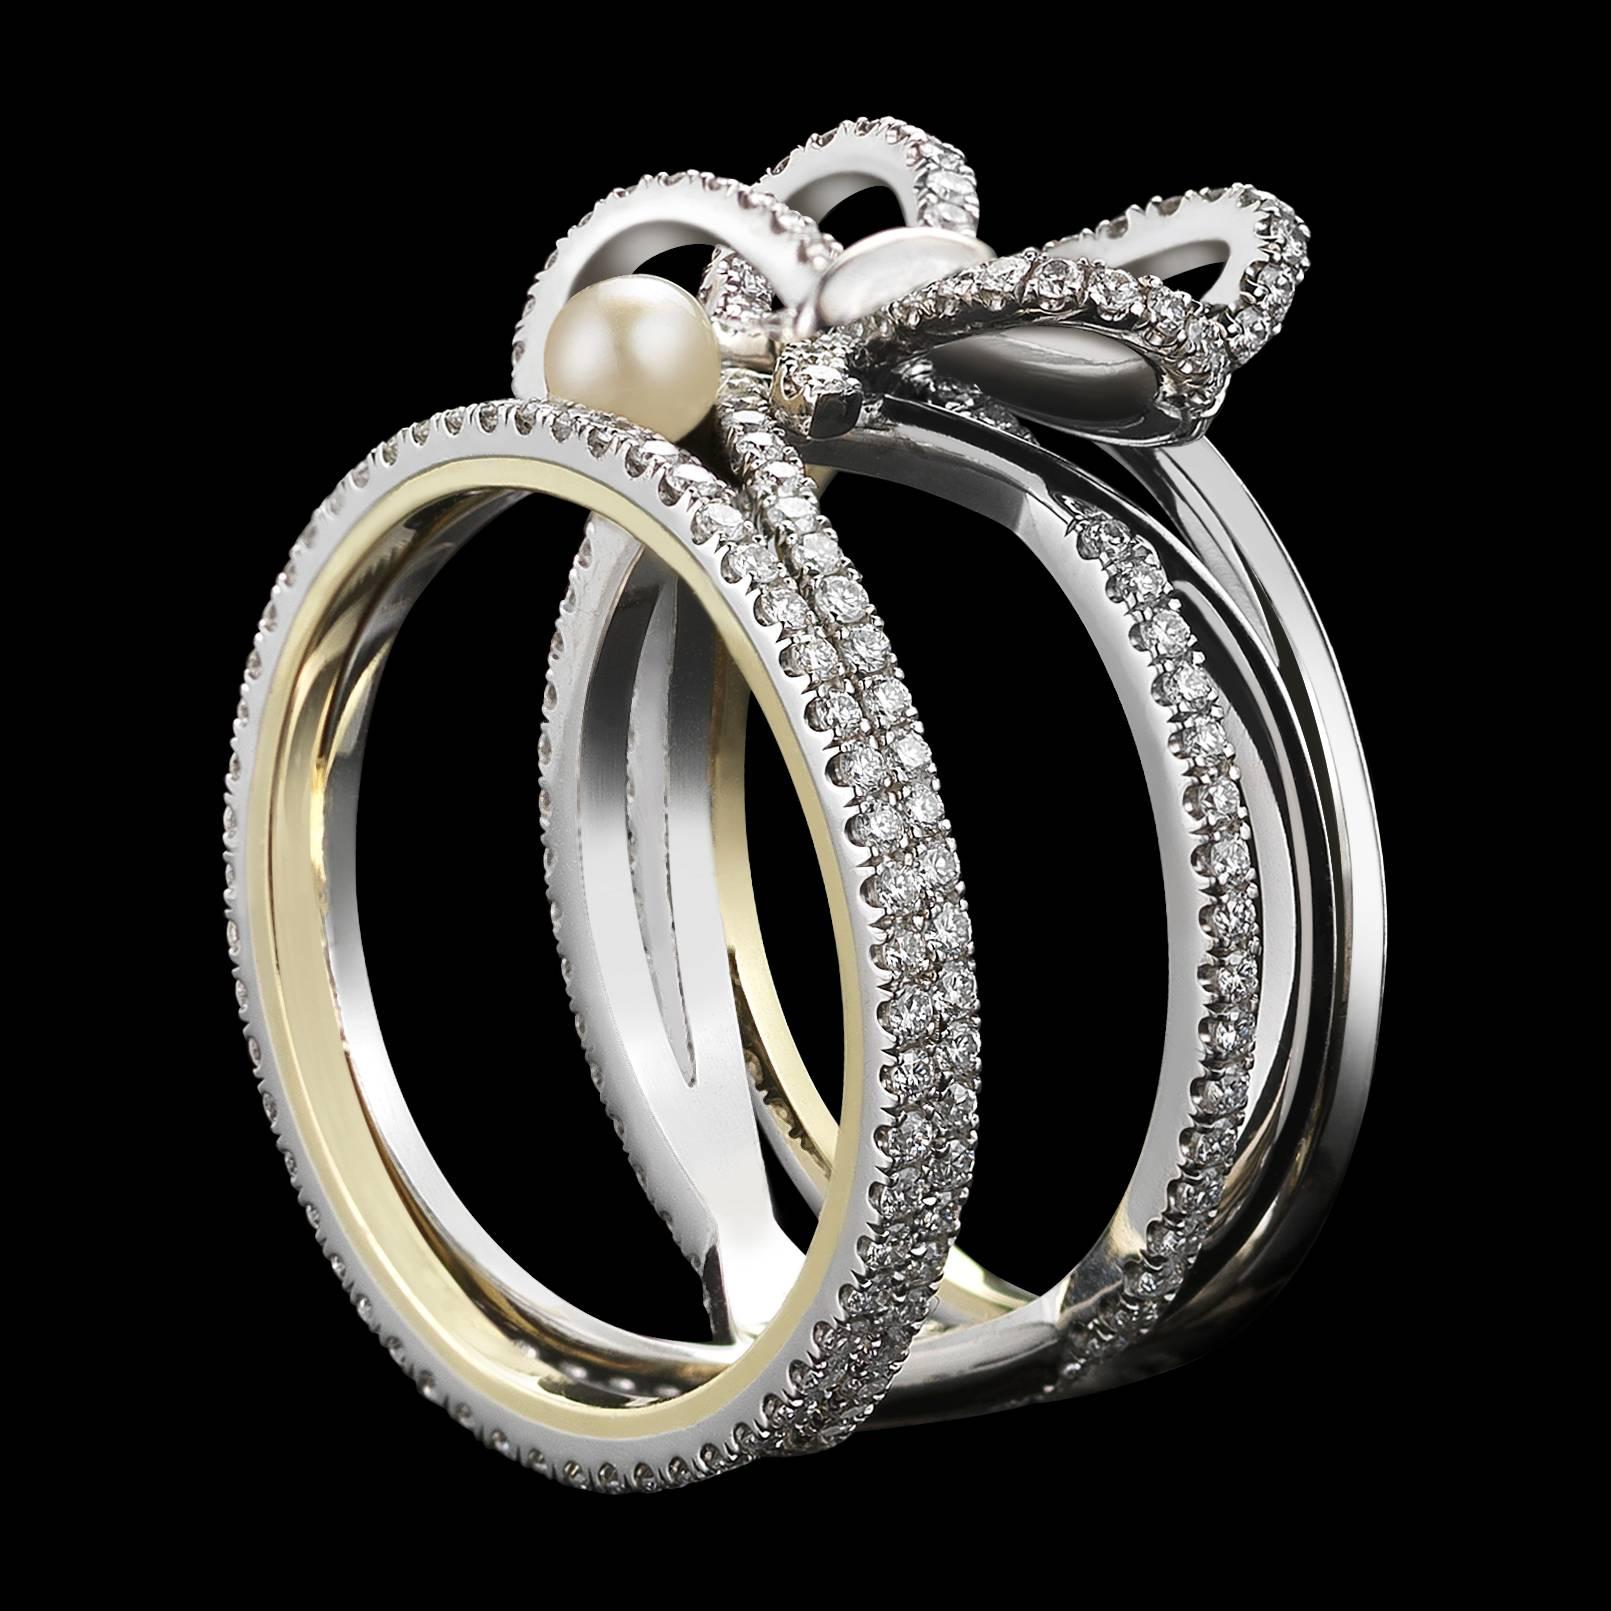 An Alexandra Mor contemporary Diamond Bow and Pearl ring set with Alexandra Mor signature details of 1mm knife-edged wire and 1mm floating Diamond melee weighing a total of 1.13 Cts. 

Ring size 7.75. (Can be Sized)

This Item is New, and an